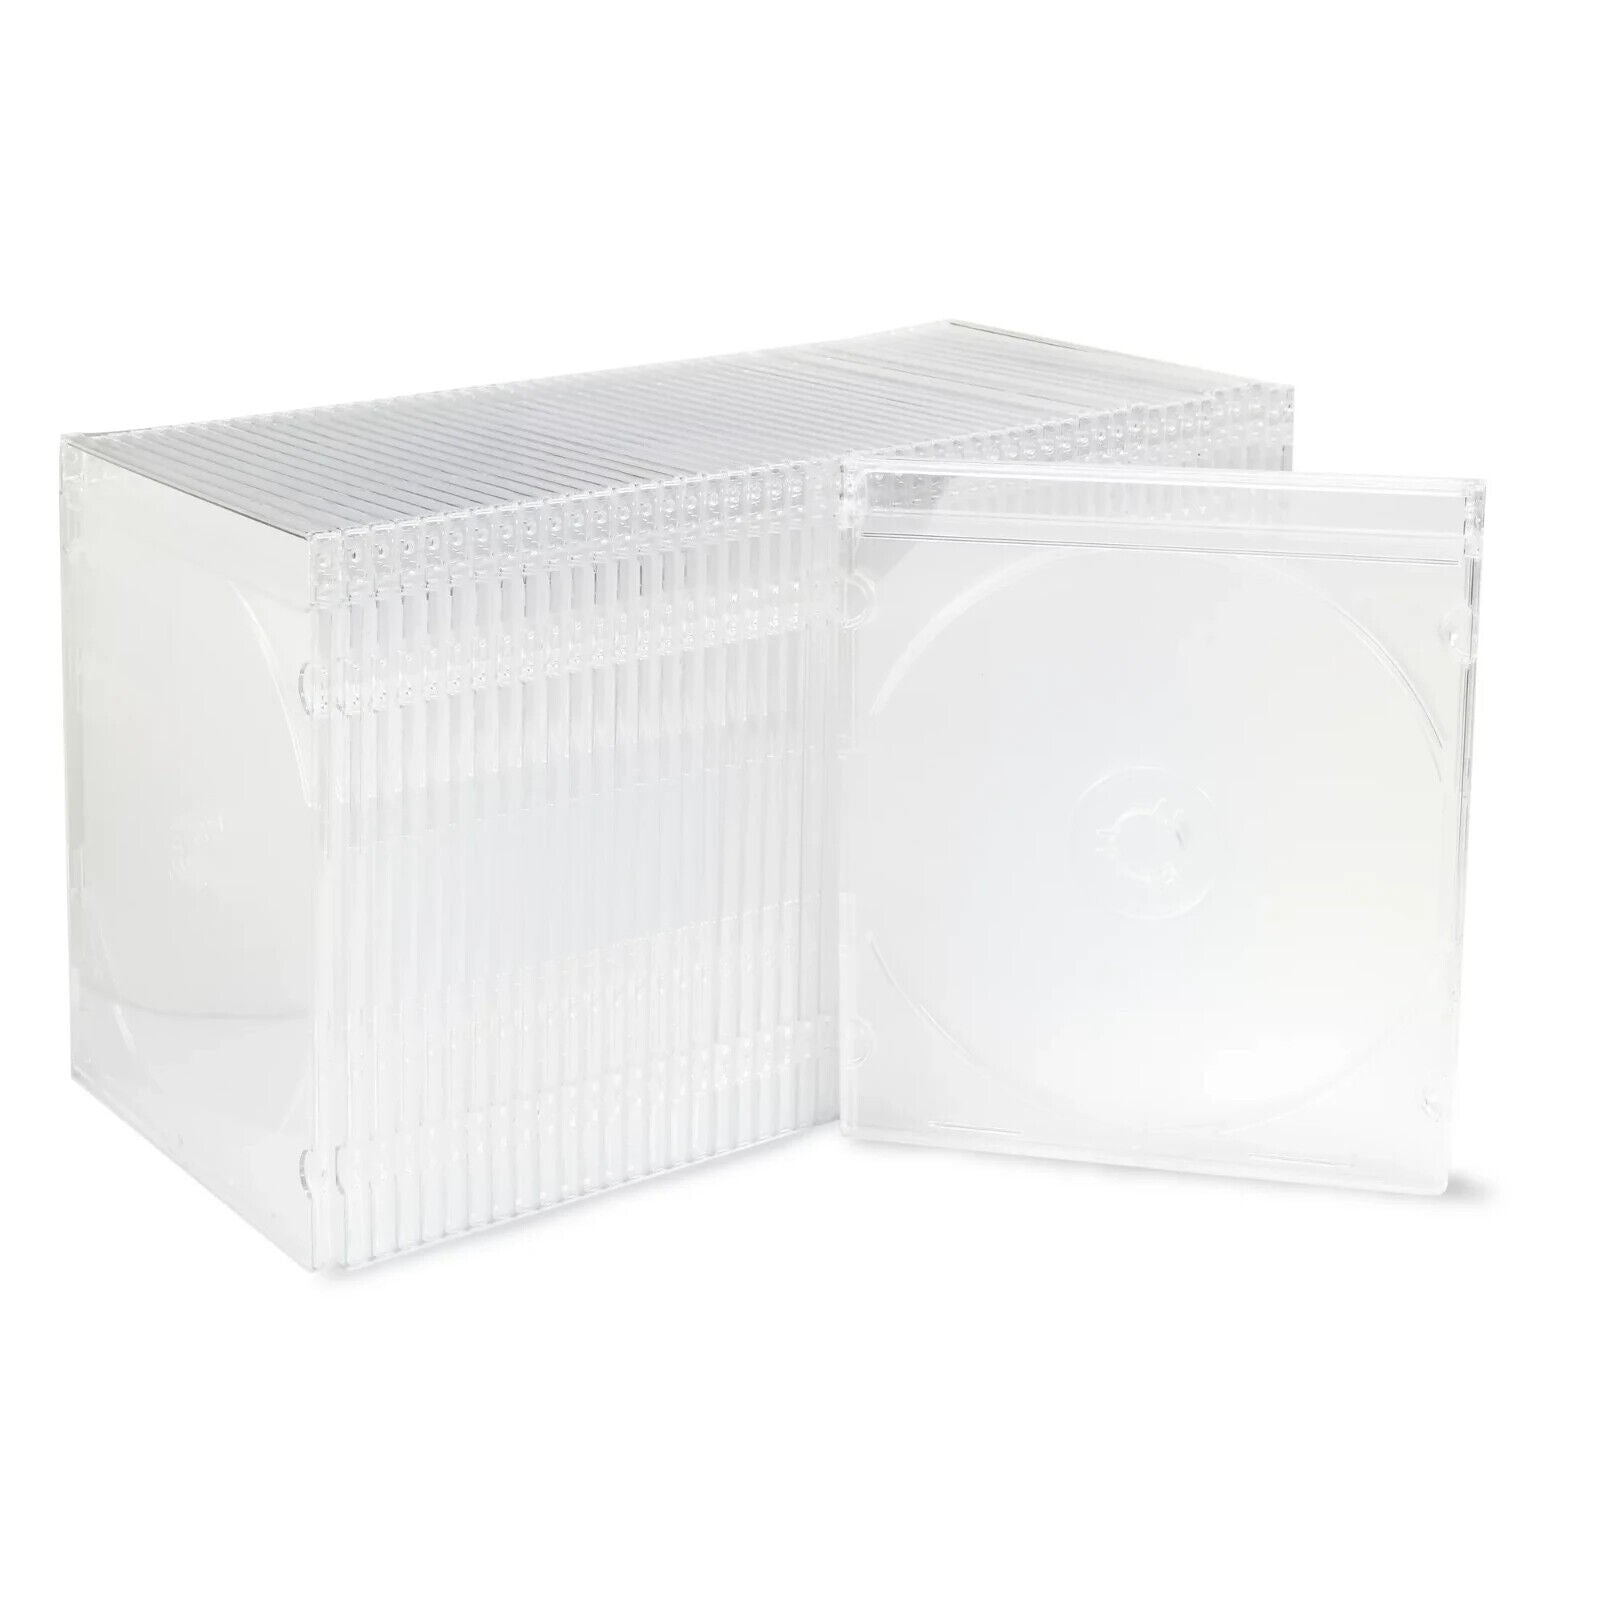 Onn 50-Count Slim DVD/CD/Game Disc Clear Storage Cases